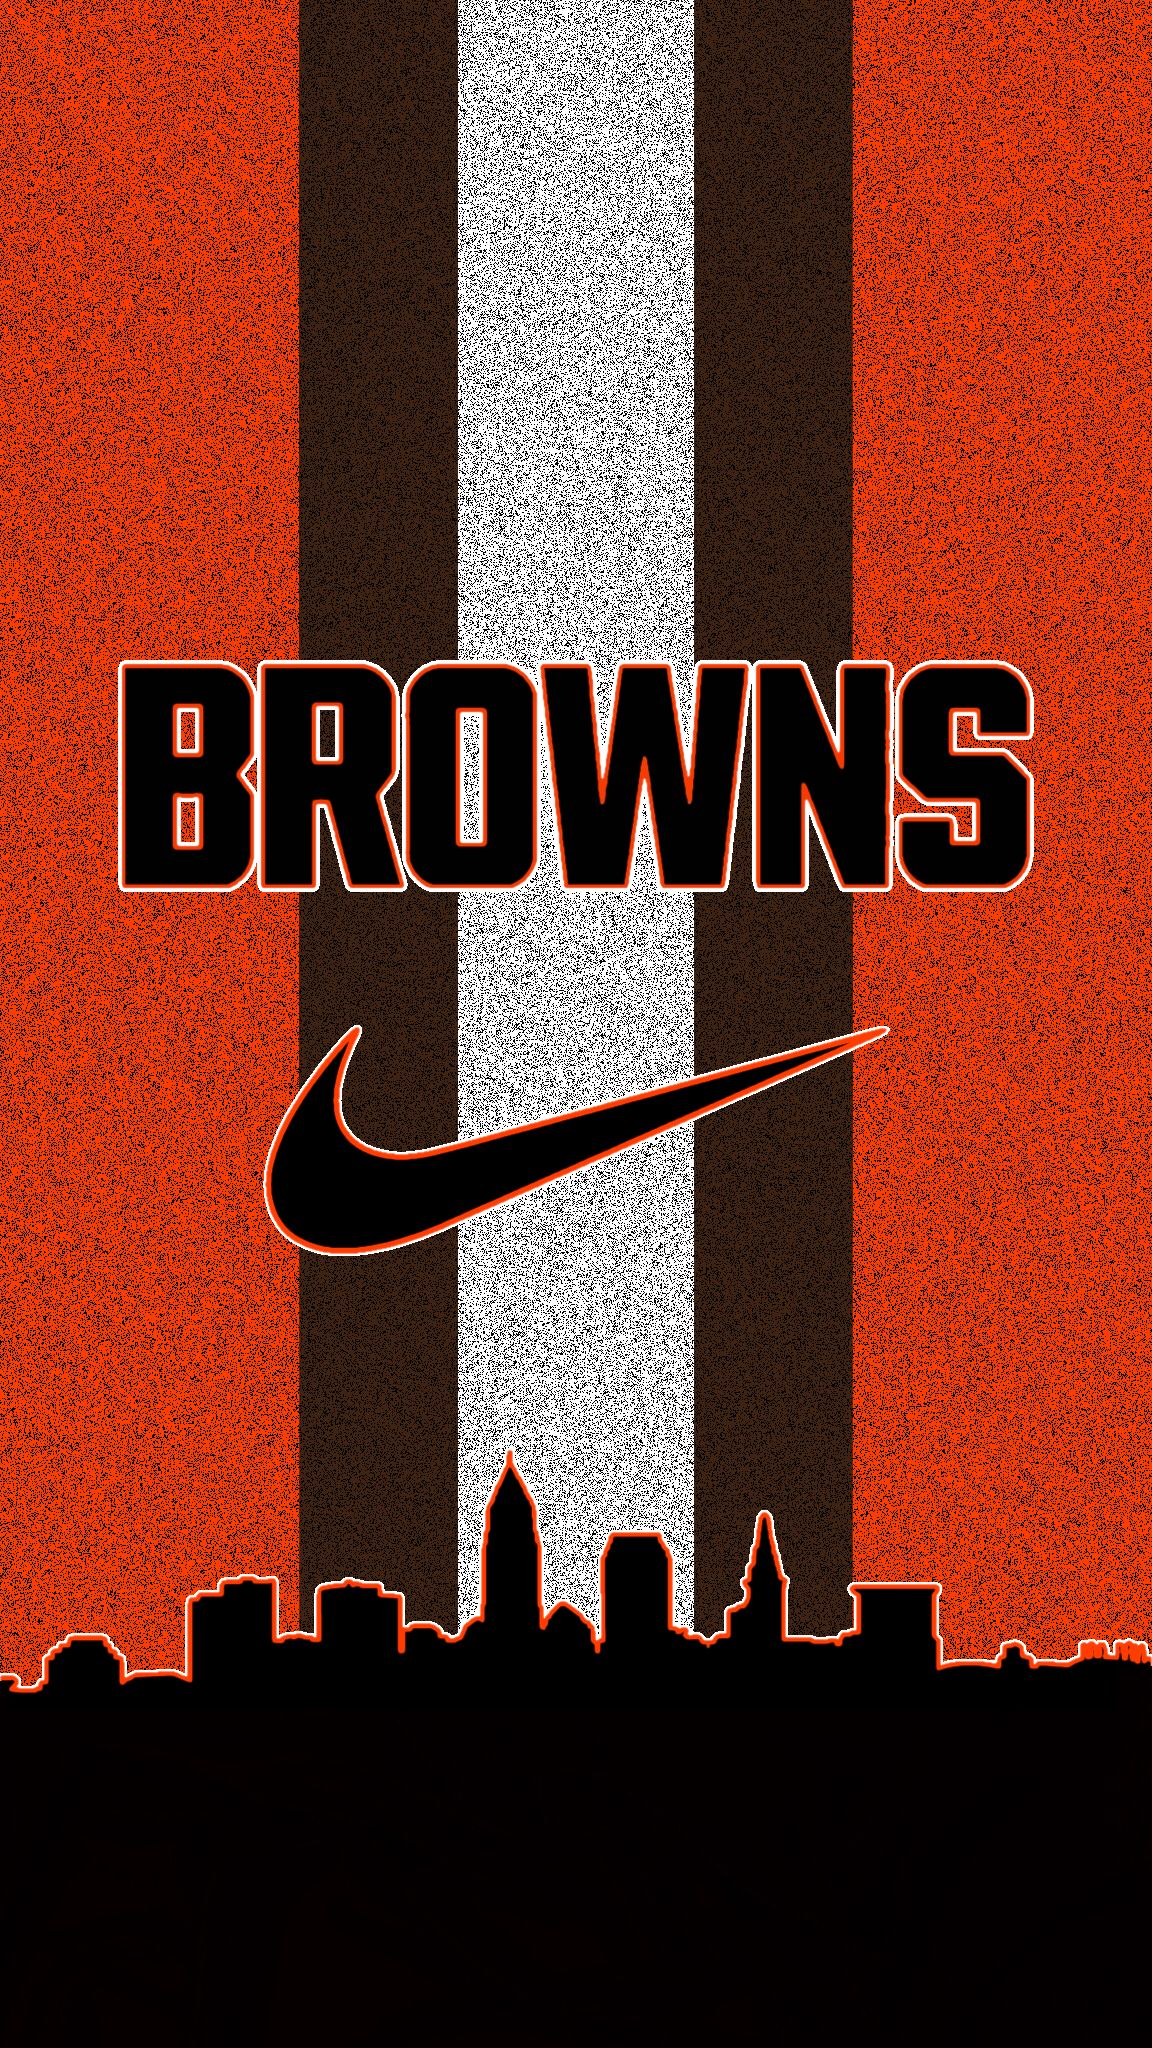 Cleveland Browns HD Wallpaper On